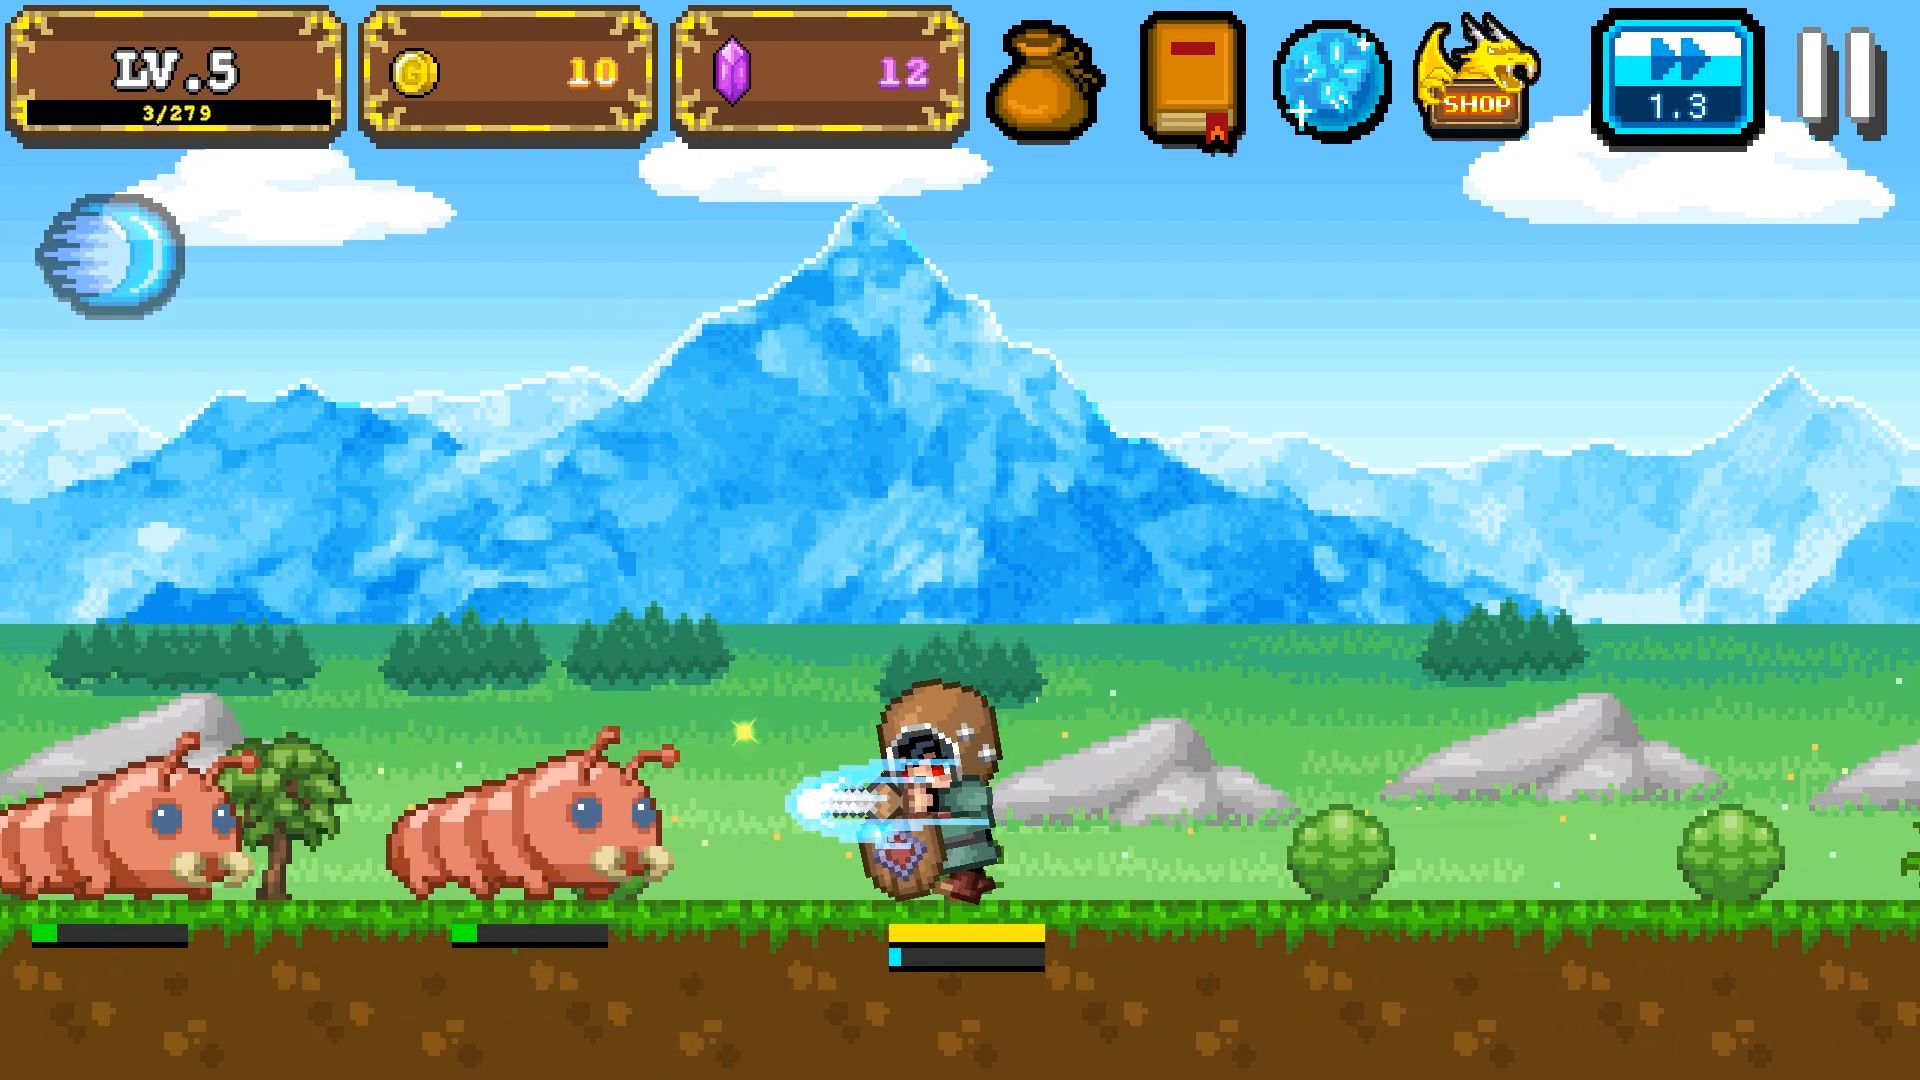 Gameplay of the Tap Knight : Dragon's Attack for Android phone or tablet.